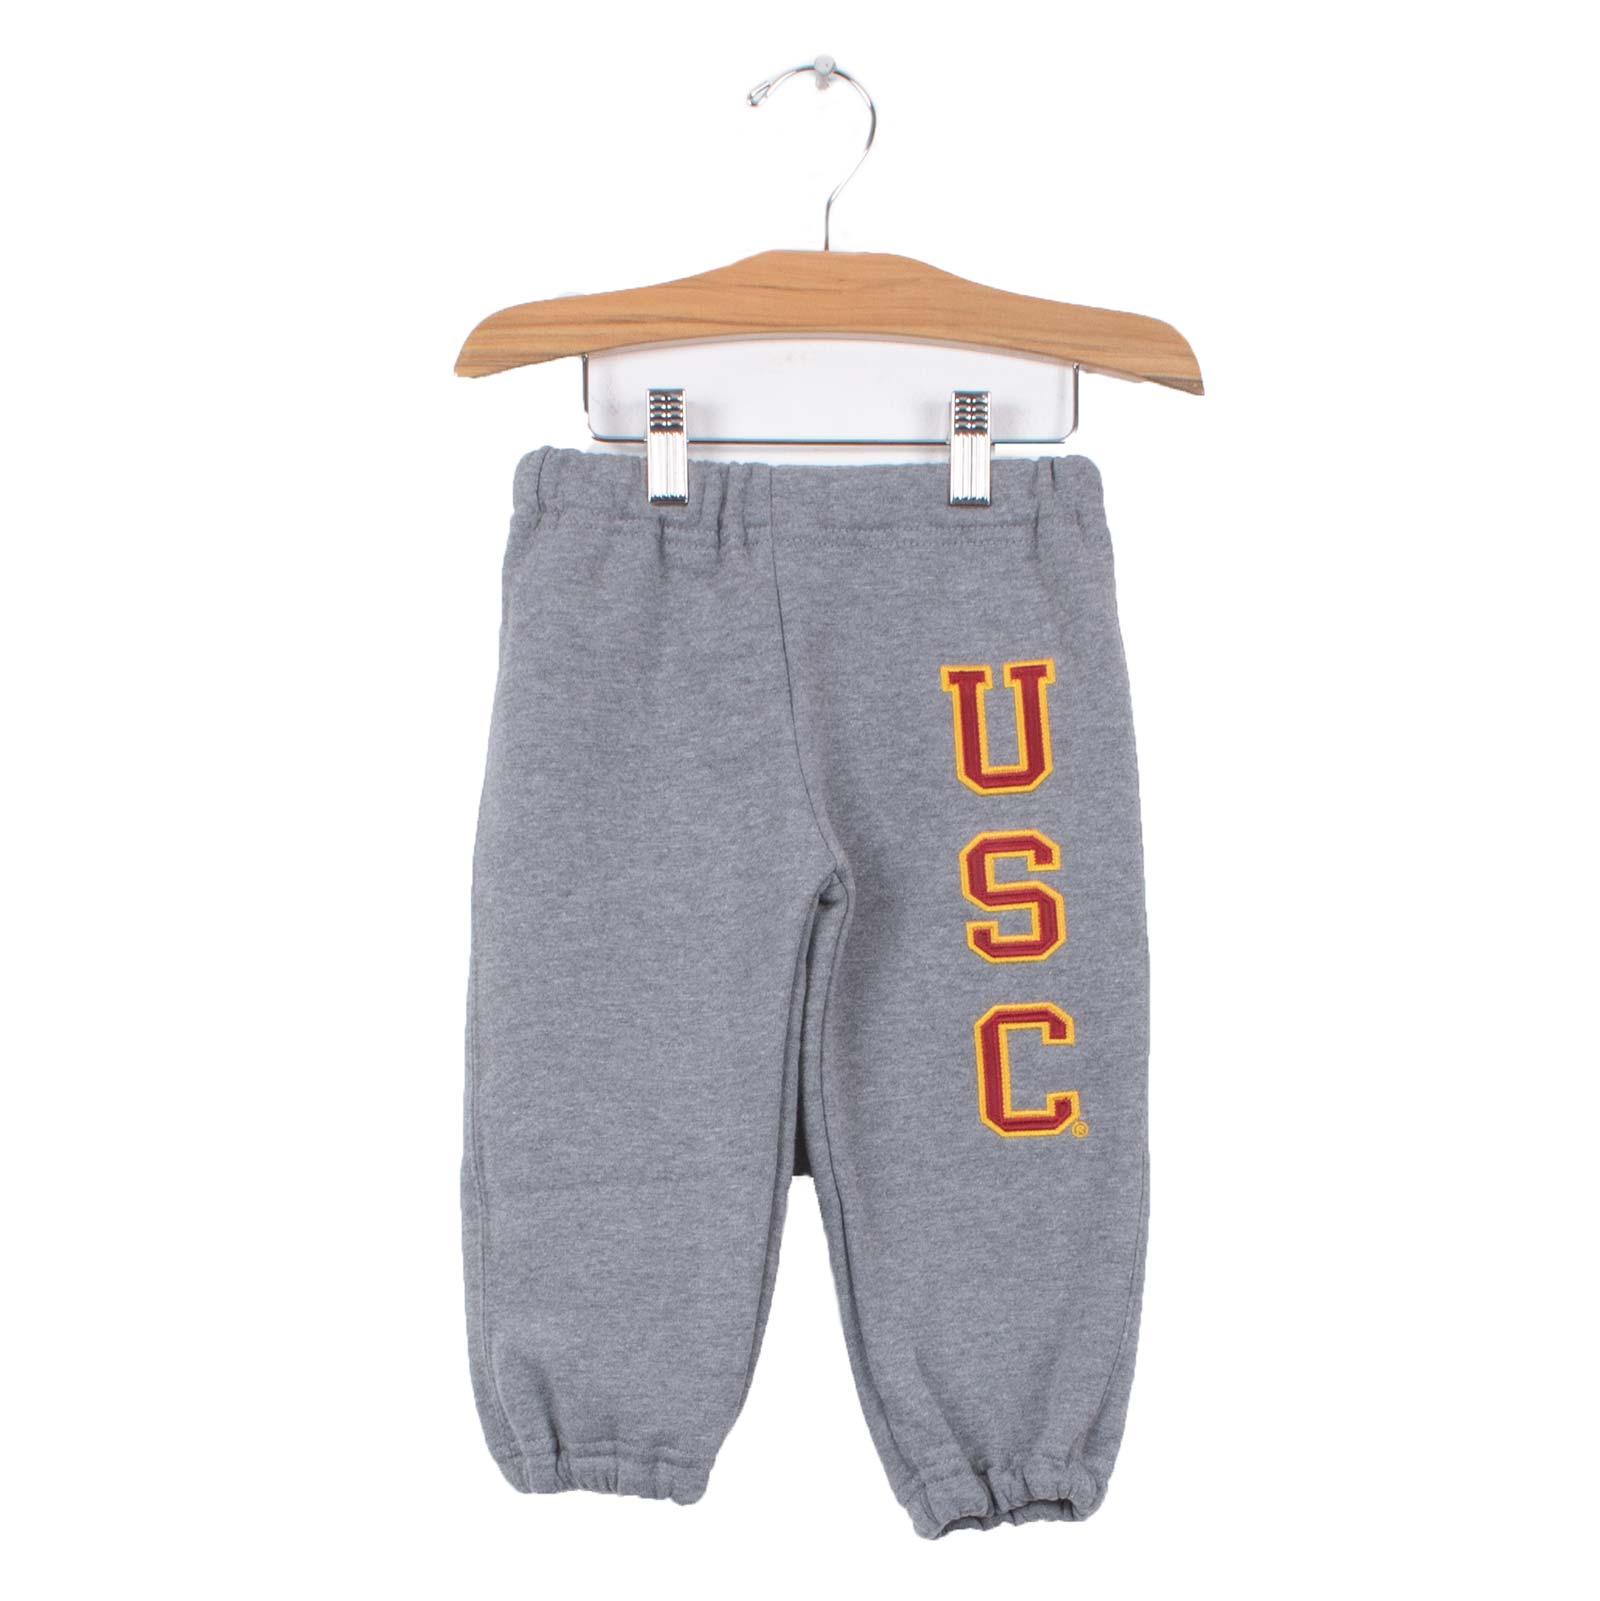 USC Arch Toddler TT Pant Oxford image61